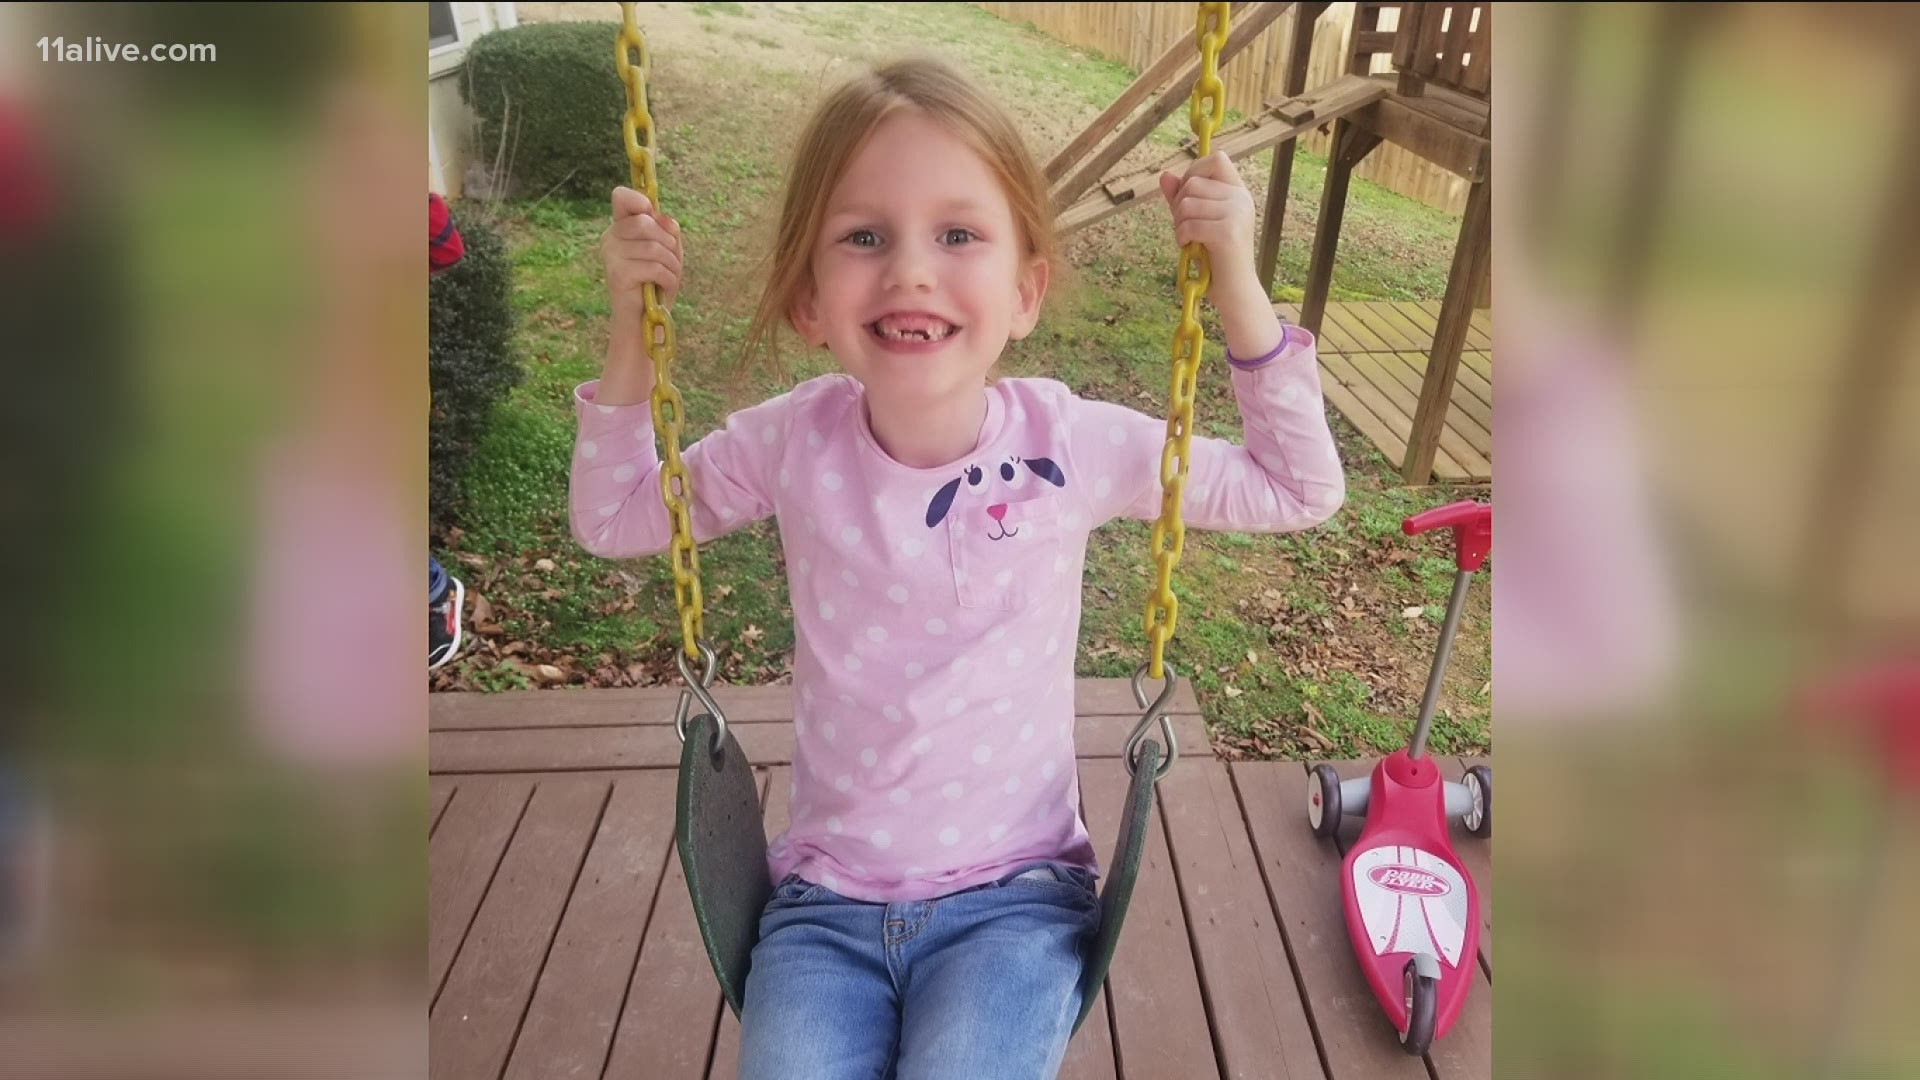 An 8-year-old left rules to live by before she died. Now, they're inspiring the 'Connect with Kindness' campaign at Children's Healthcare of Atlanta.